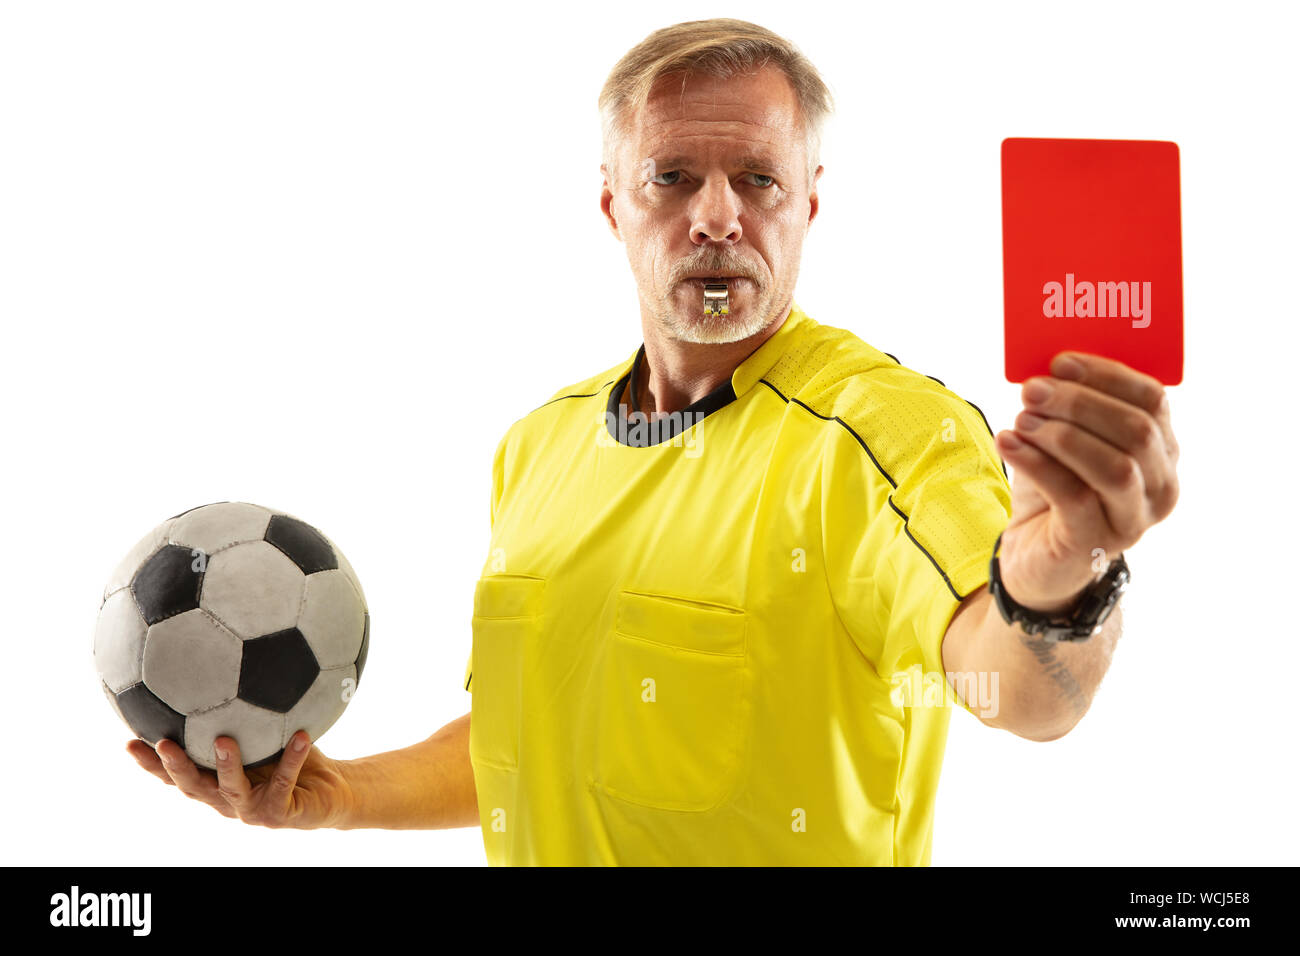 referee holding ball and showing a red card to a football or soccer player while gaming on white studio background concept of sport rules violation controversial issues obstacles overcoming WCJ5E8